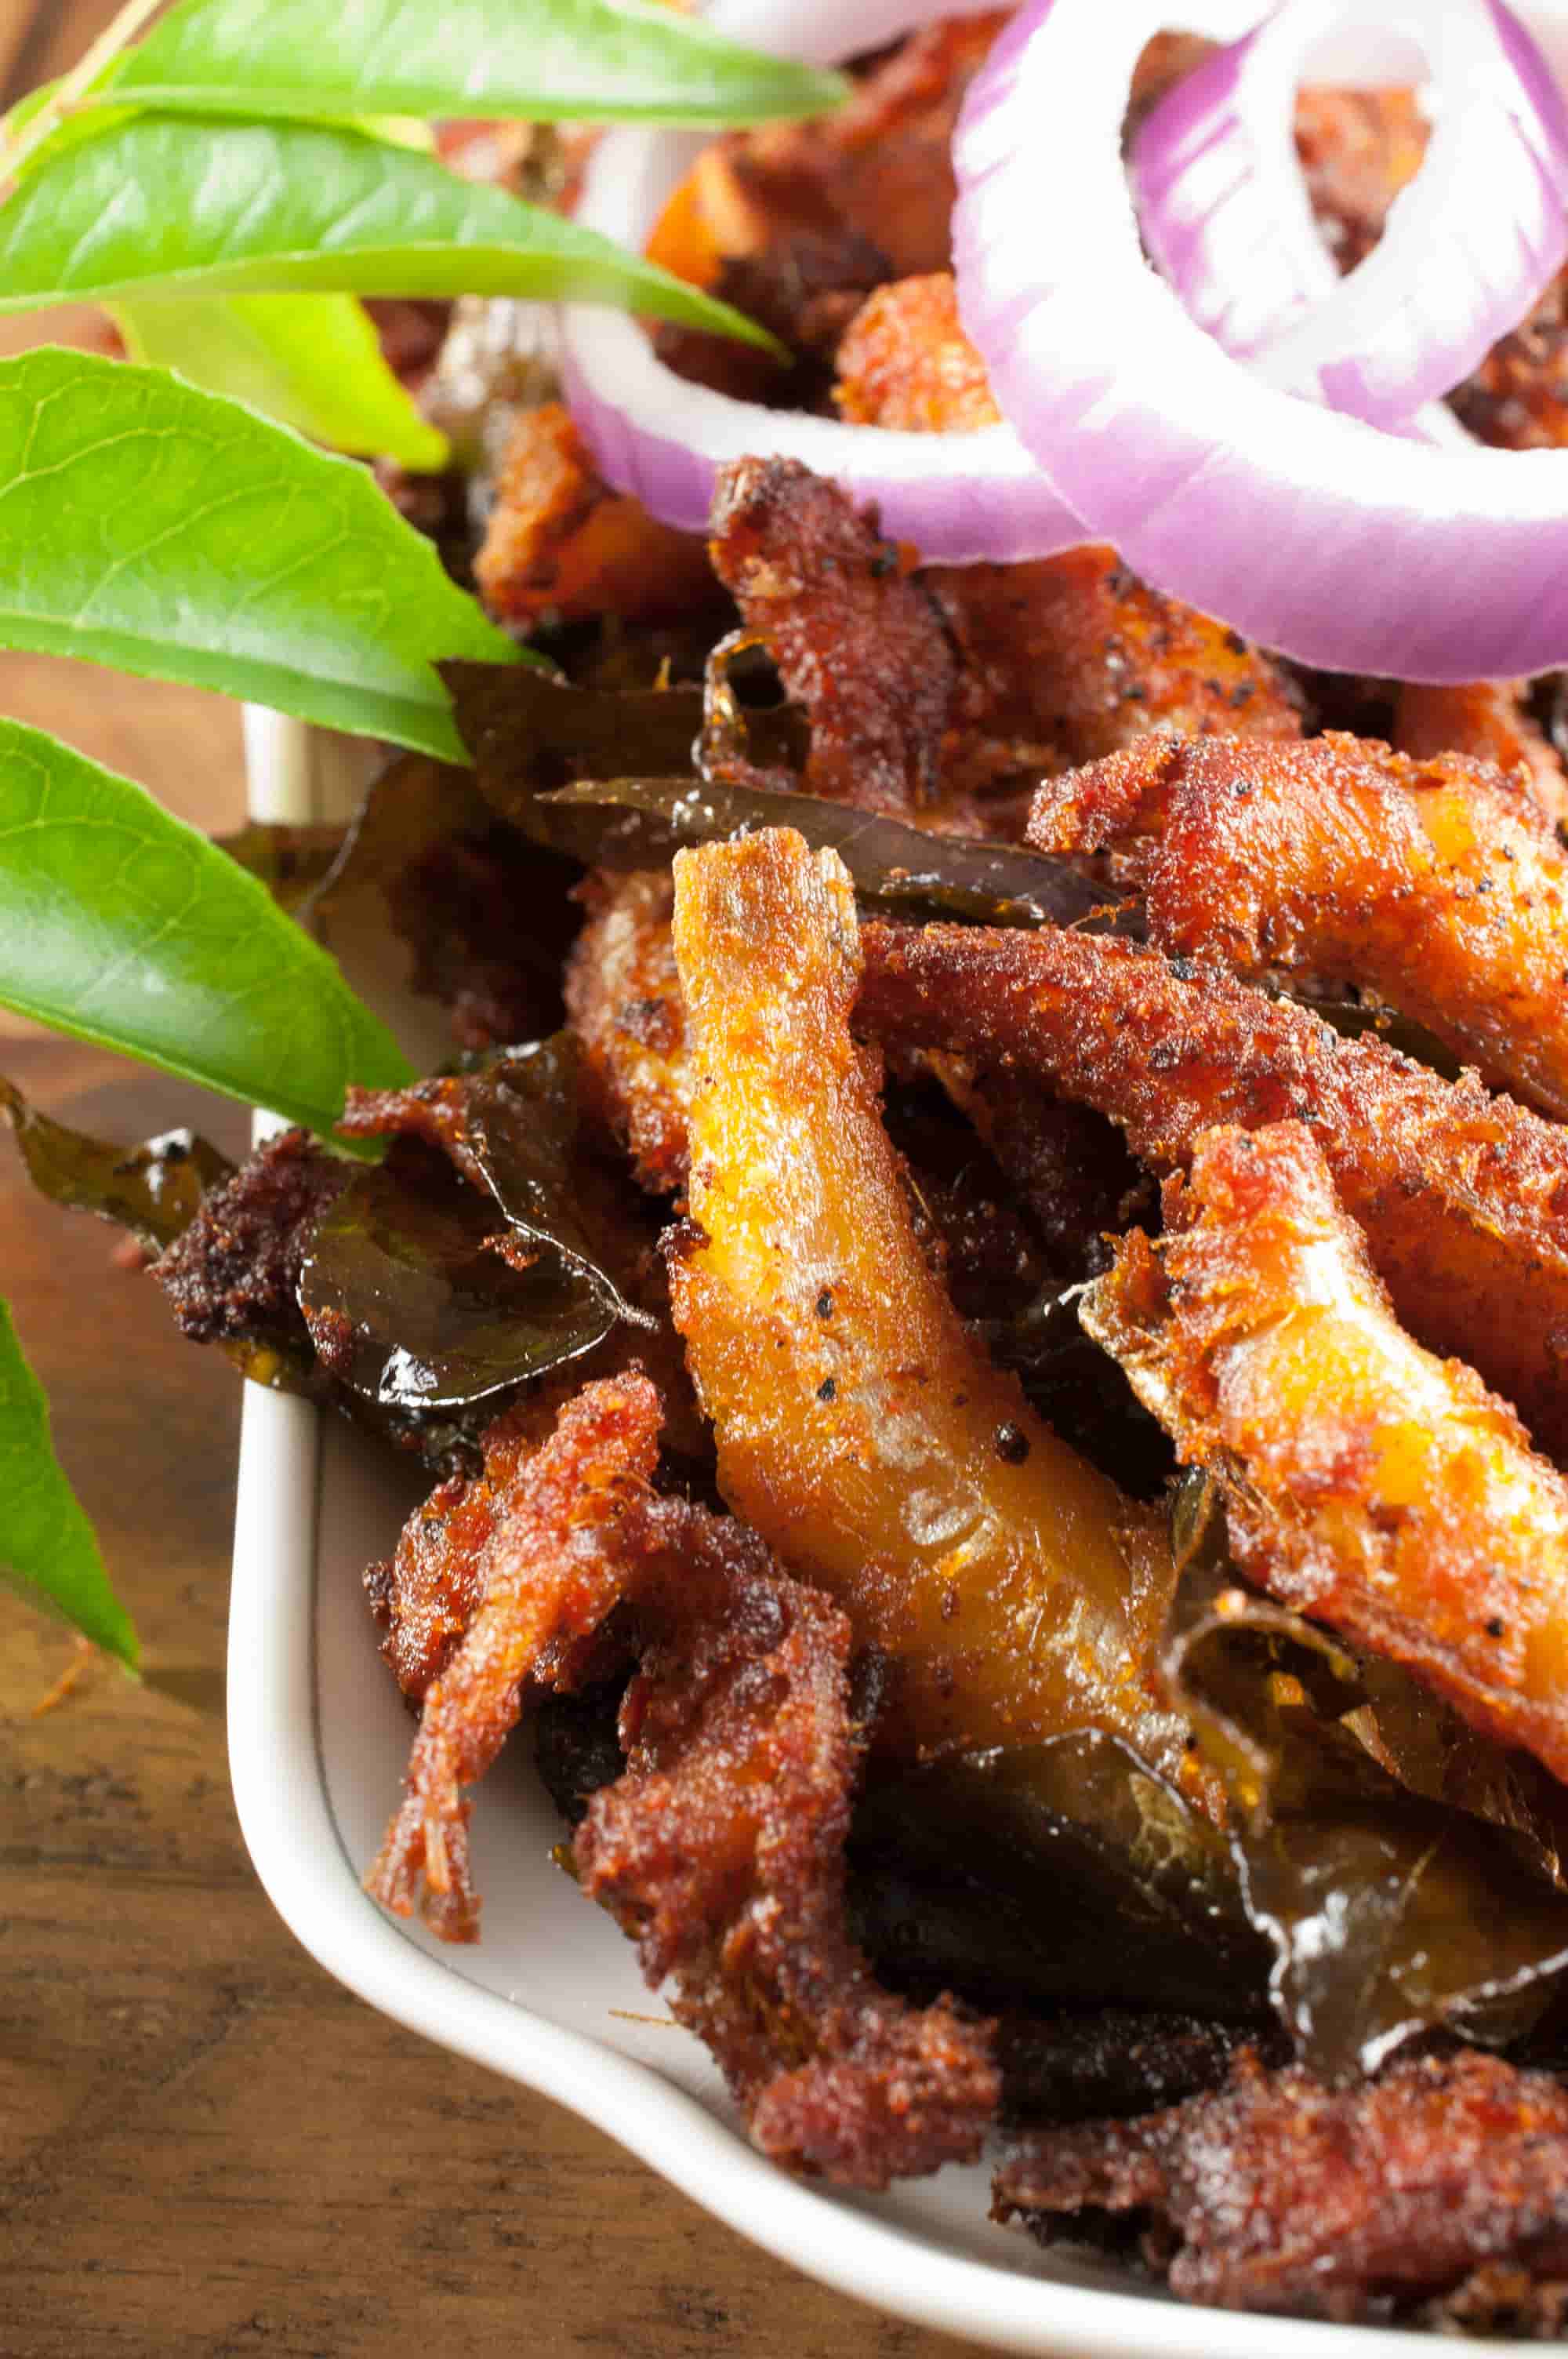 Crispy and spicy Anchovy or Kozhuva or Netholi fry. Anchovies marinated with spices and then shallow fried. A quite easy and tasty appetizer.